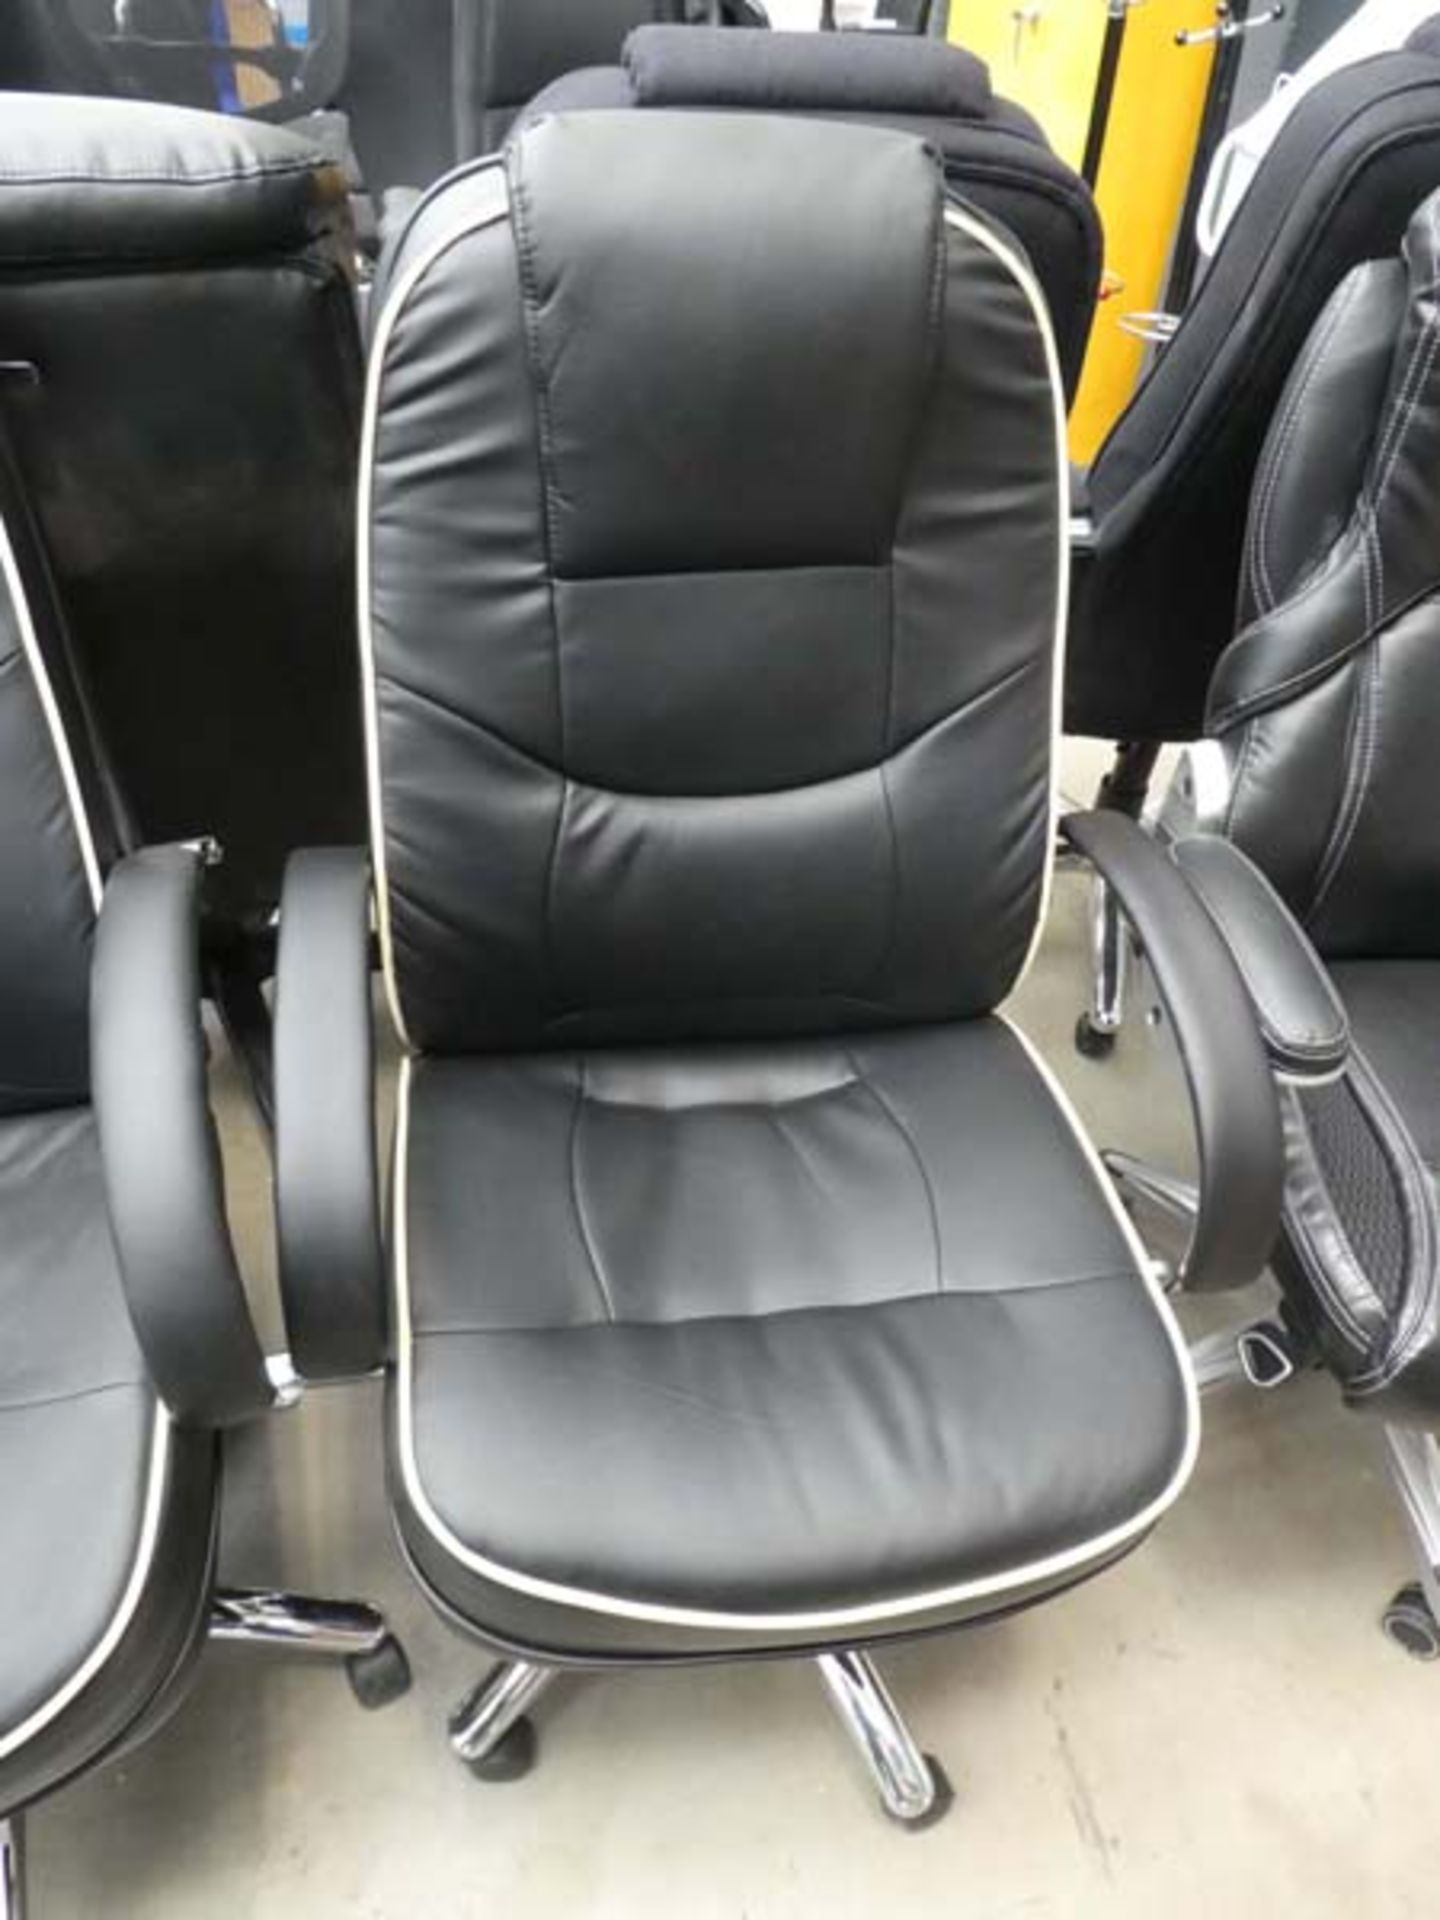 Black high back executive style swivel armchair with cream piping